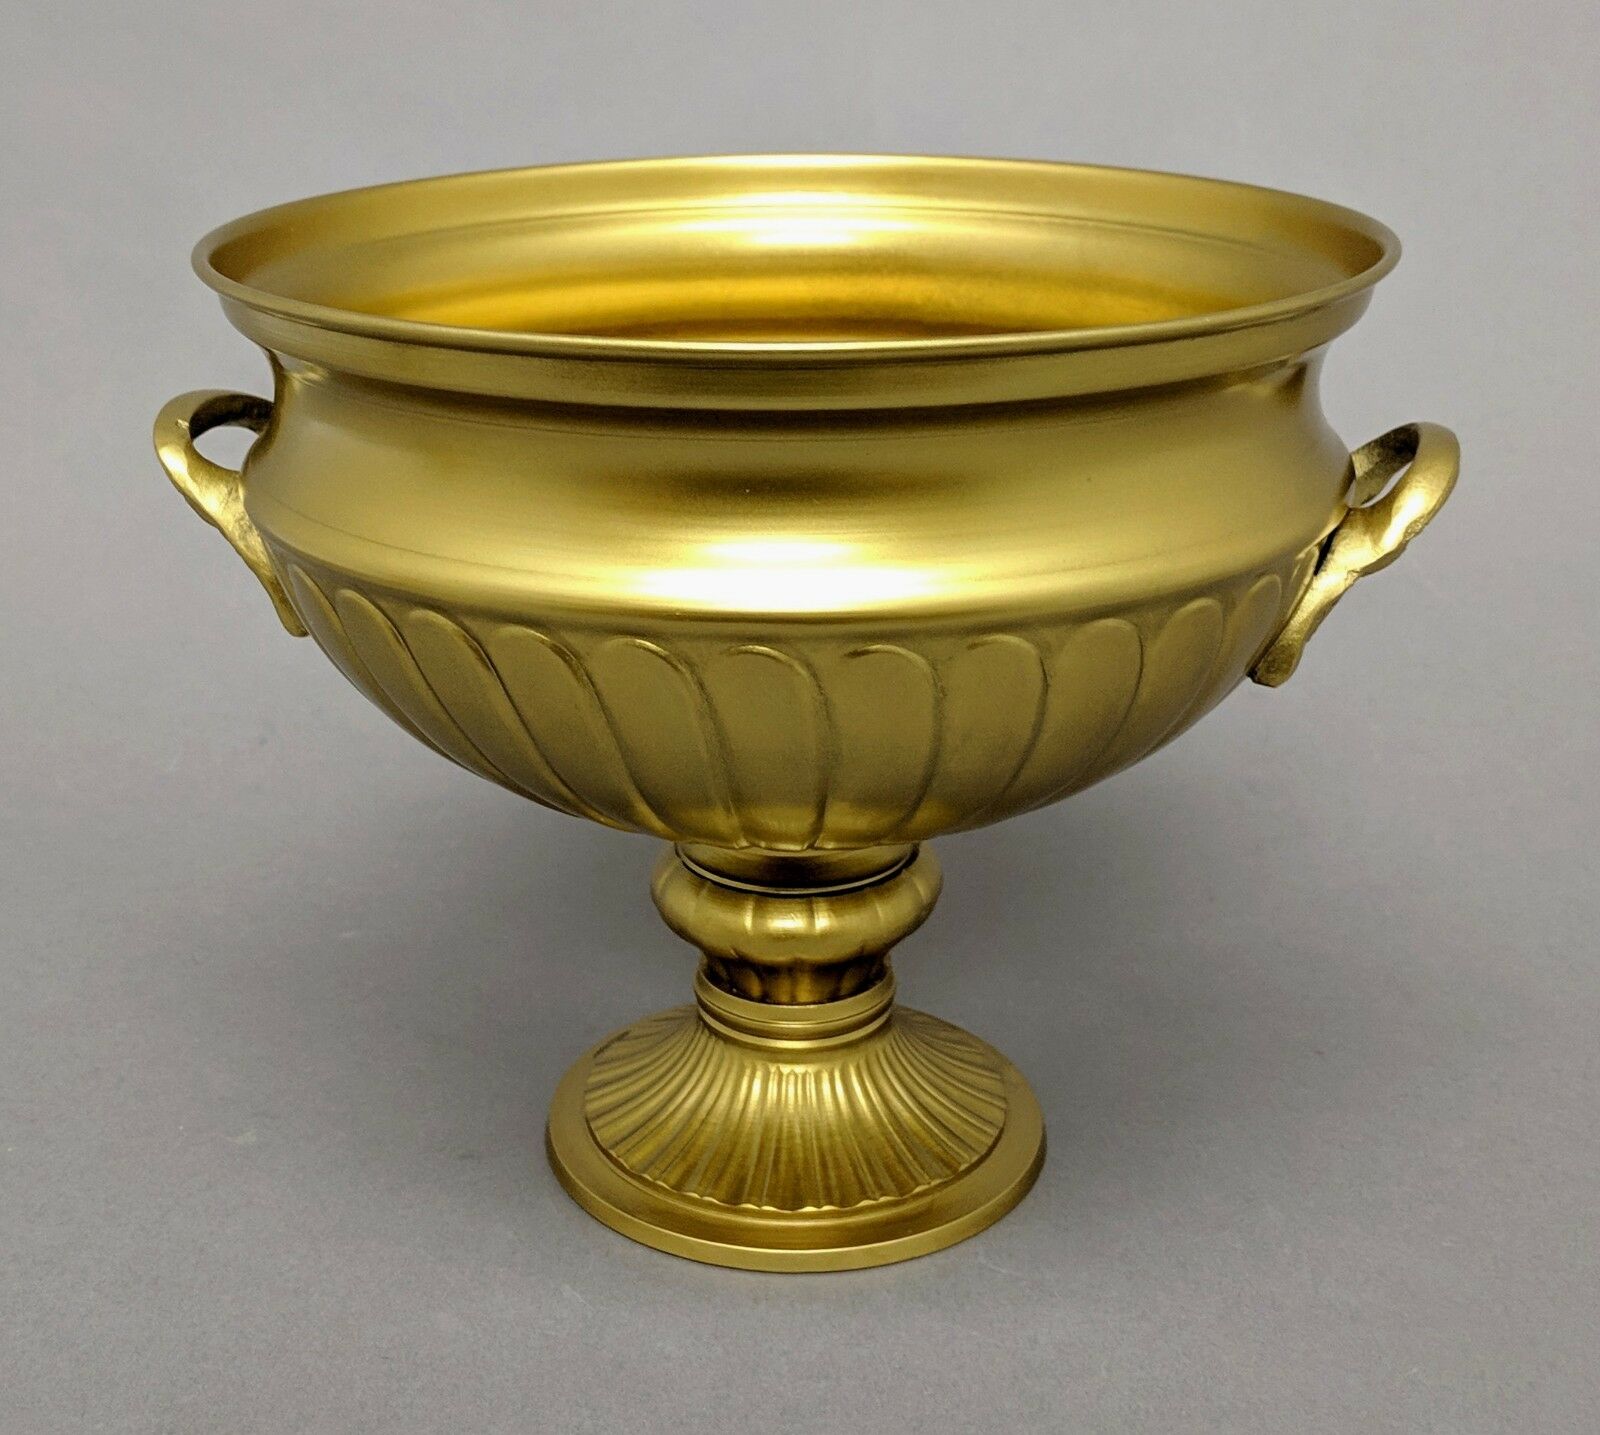 Compote Bowl Vase Gold Finish Brass With Handles Floral Centerpiece 8"dia 7"high